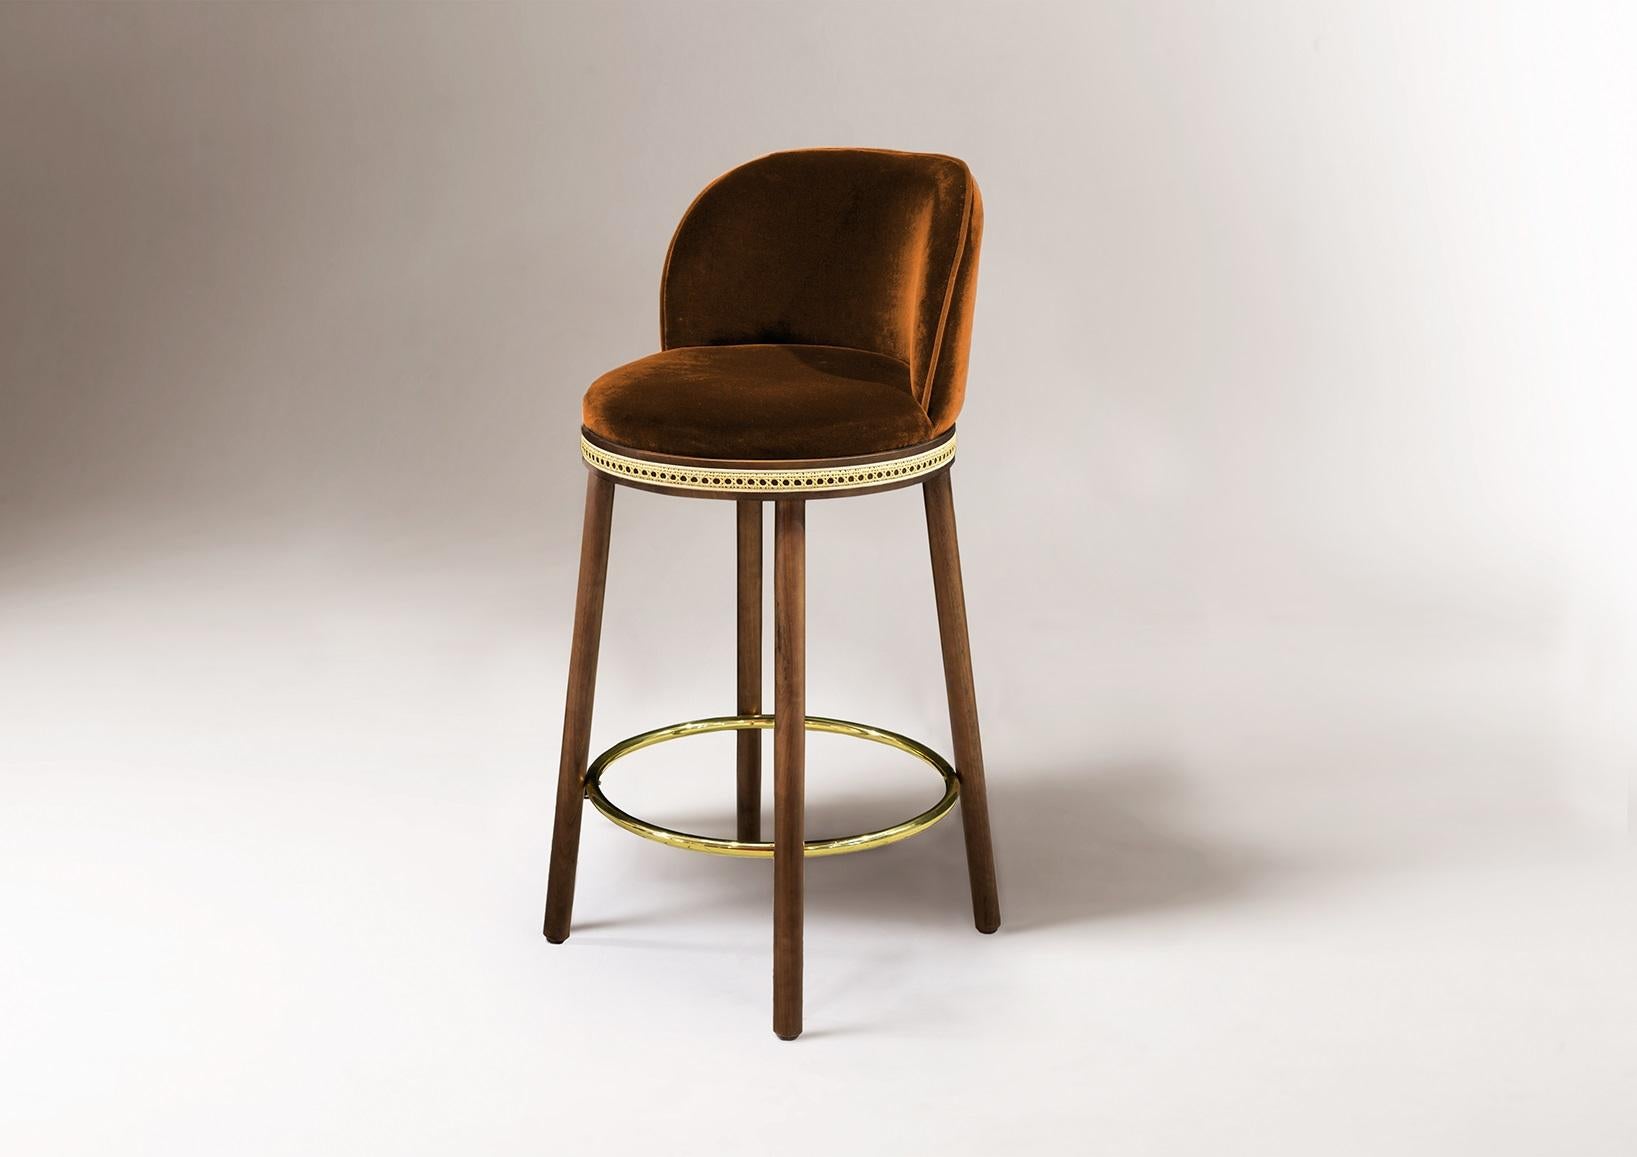 DOOQ Mid-Century Modern Bar Chair Alma with Brown Velvet, Walnut and Brass

In a piece that combines classic and modern aesthetics we can find a certain harmonic gracefulness paired with an intimate voluptuousness that can embrace you and